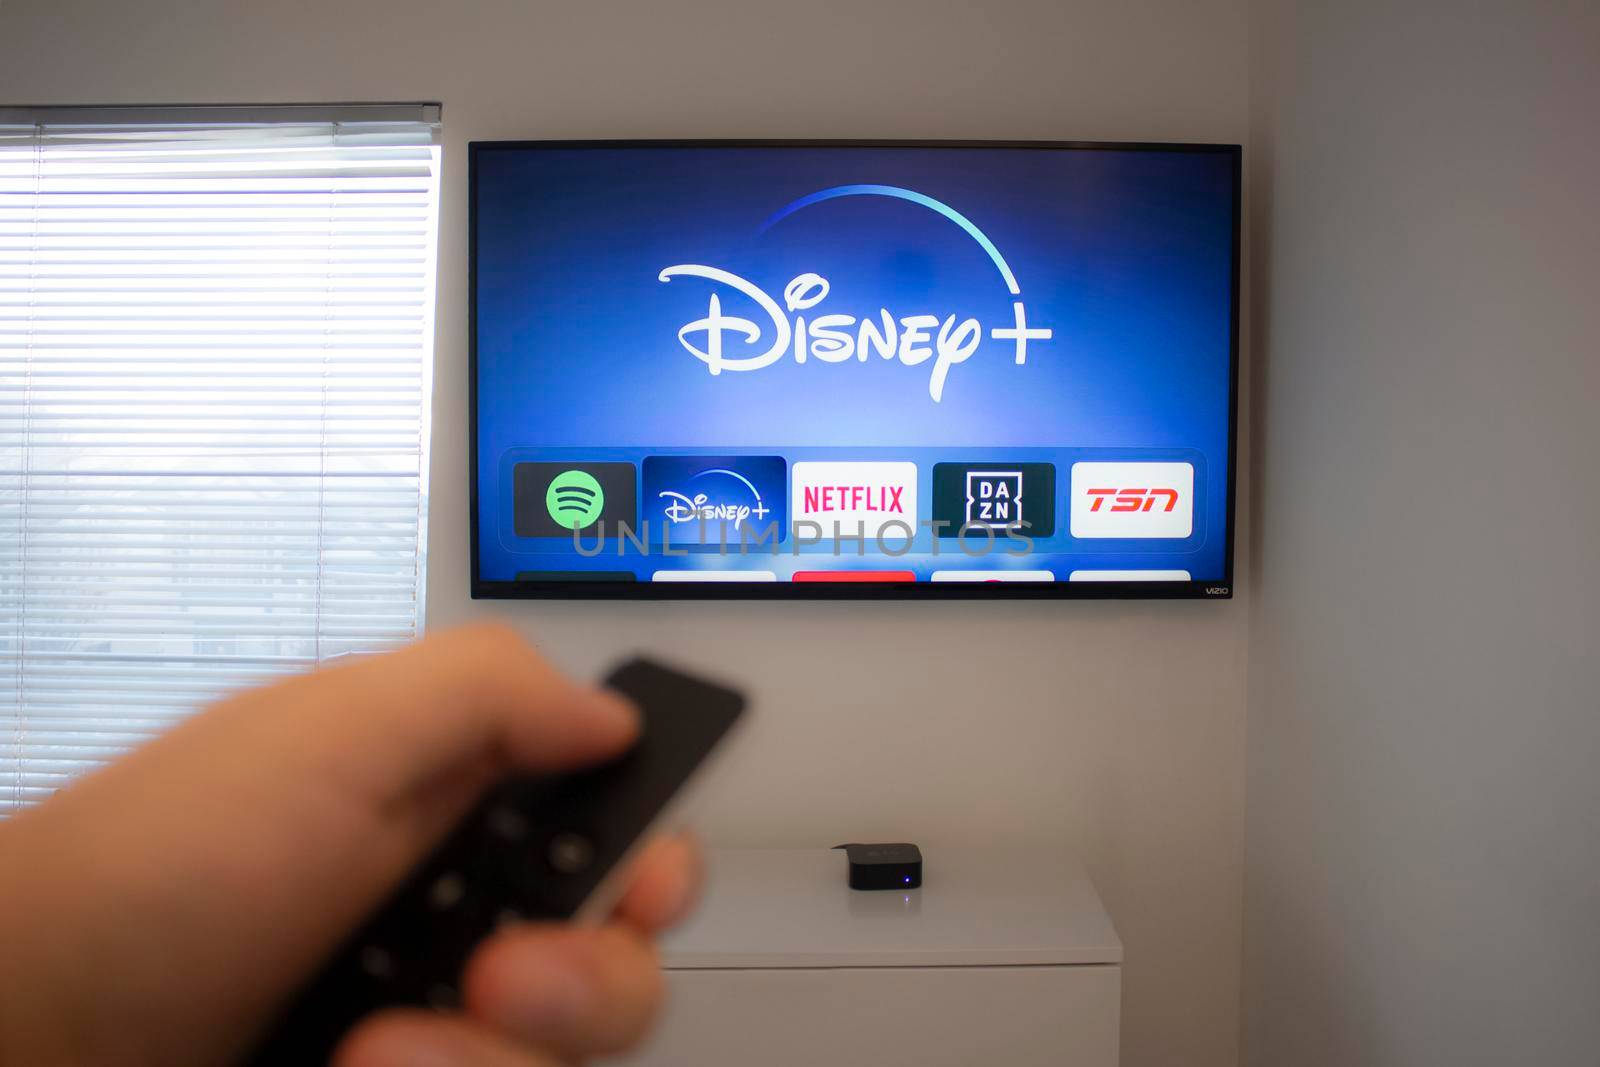 Calgary, Alberta. Canada Dec 5 2019: Person holds an Apple TV remote using the new Disney+ app on a Vizio TV. Disney+ video streaming service will exclusively show Star Wars: Jedi Template Challenge. by oasisamuel